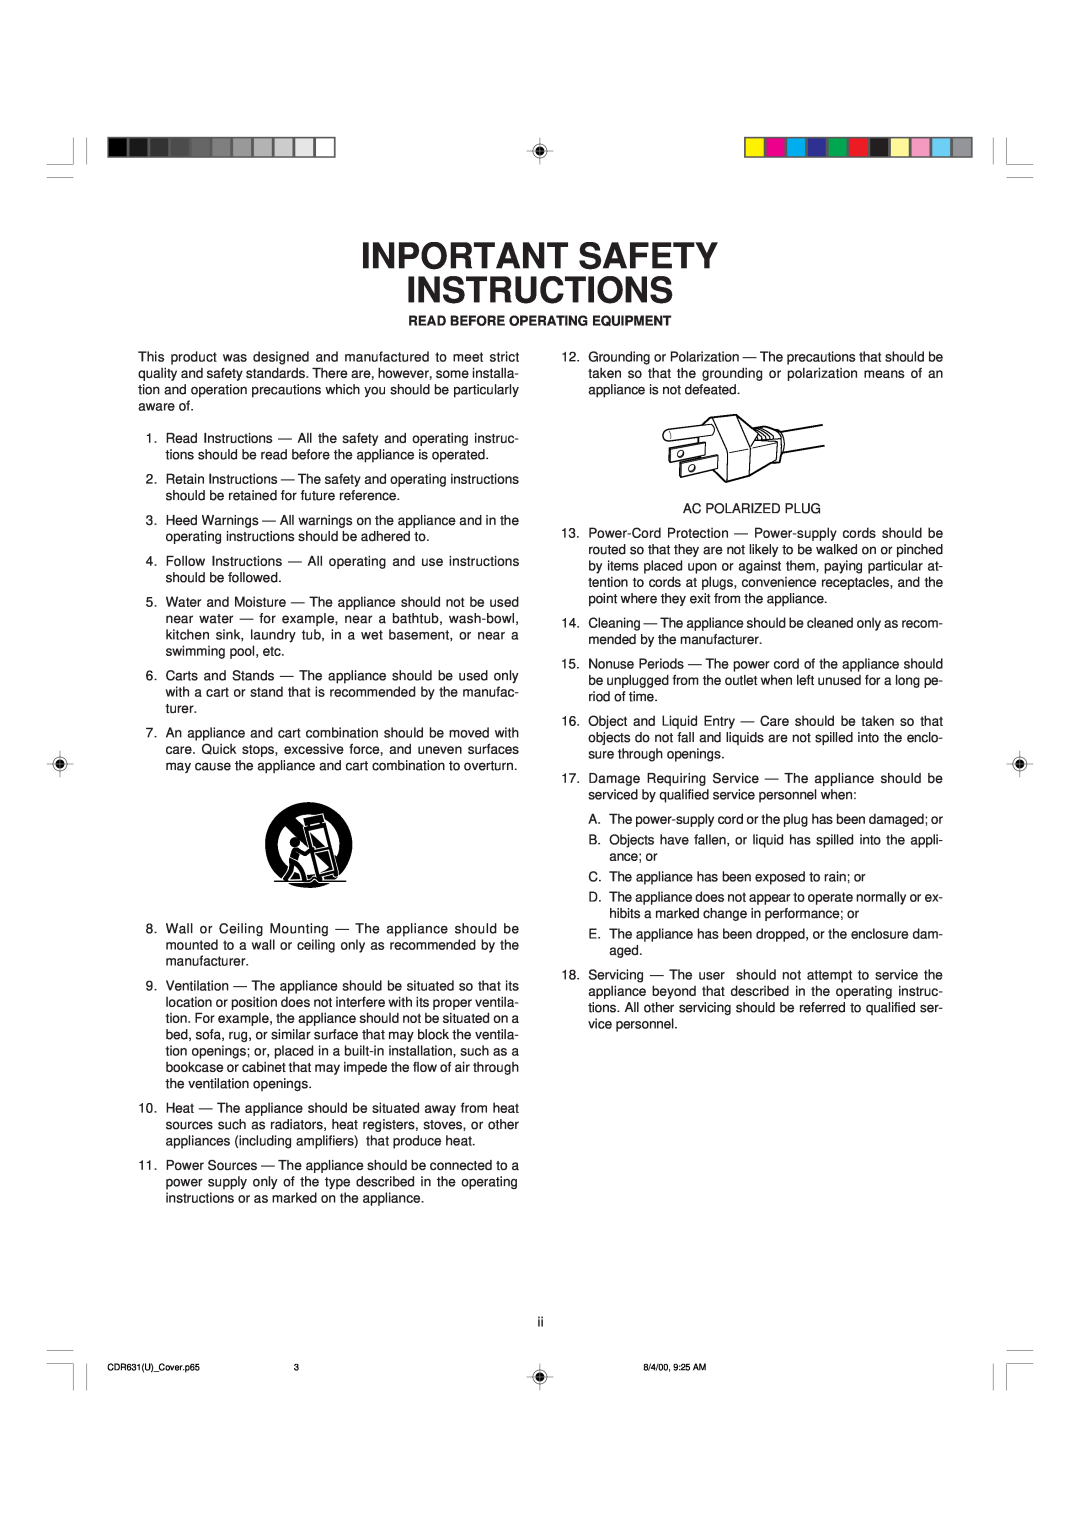 Marantz CDR631 manual Inportant Safety Instructions, Read Before Operating Equipment 